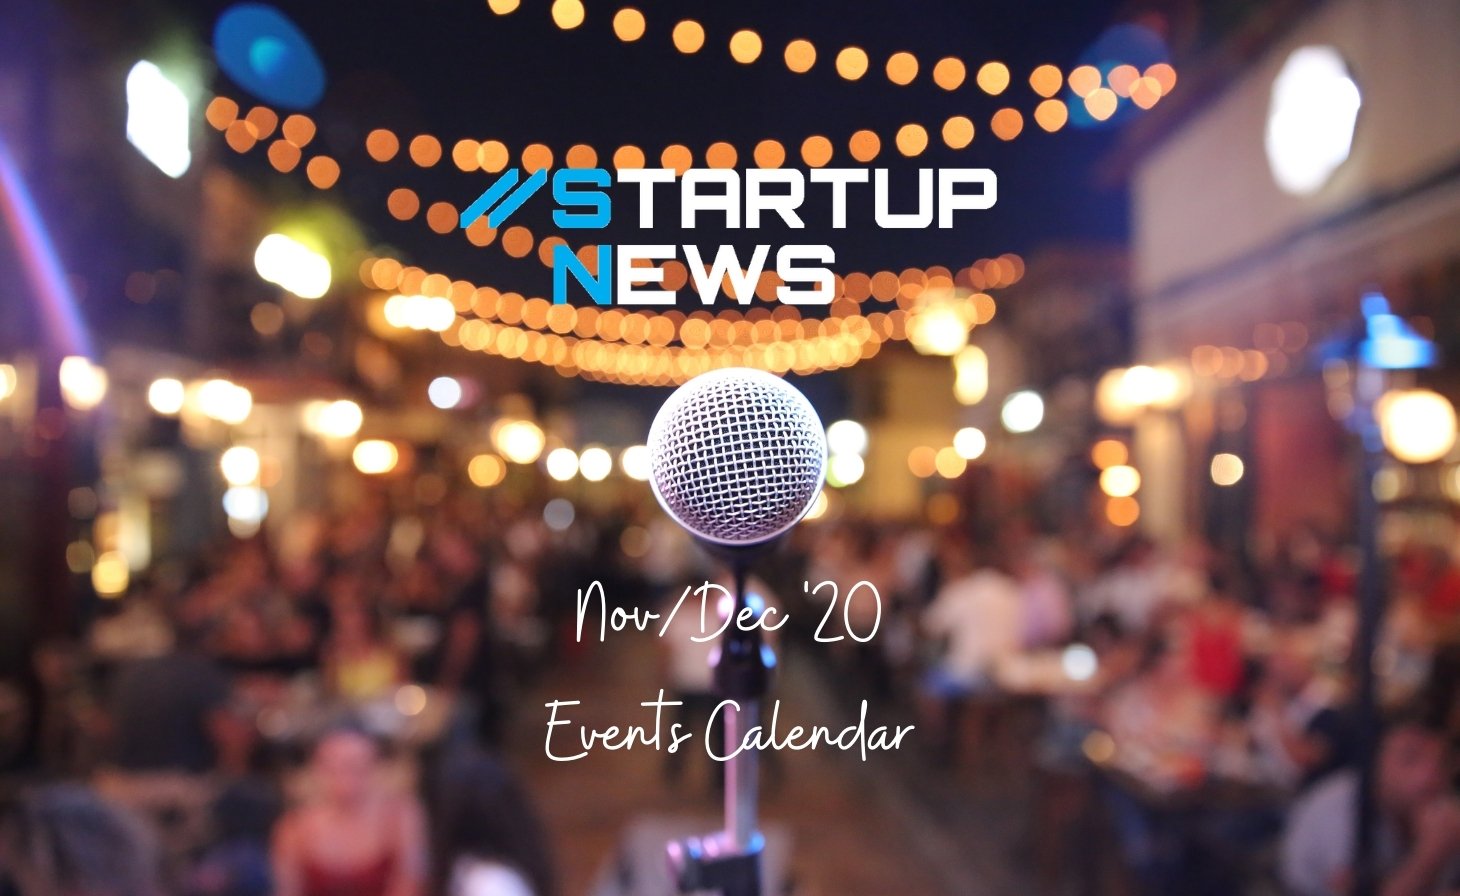 Startup Events - Nov/Dec 2020 - Startup News in WA, events, advice